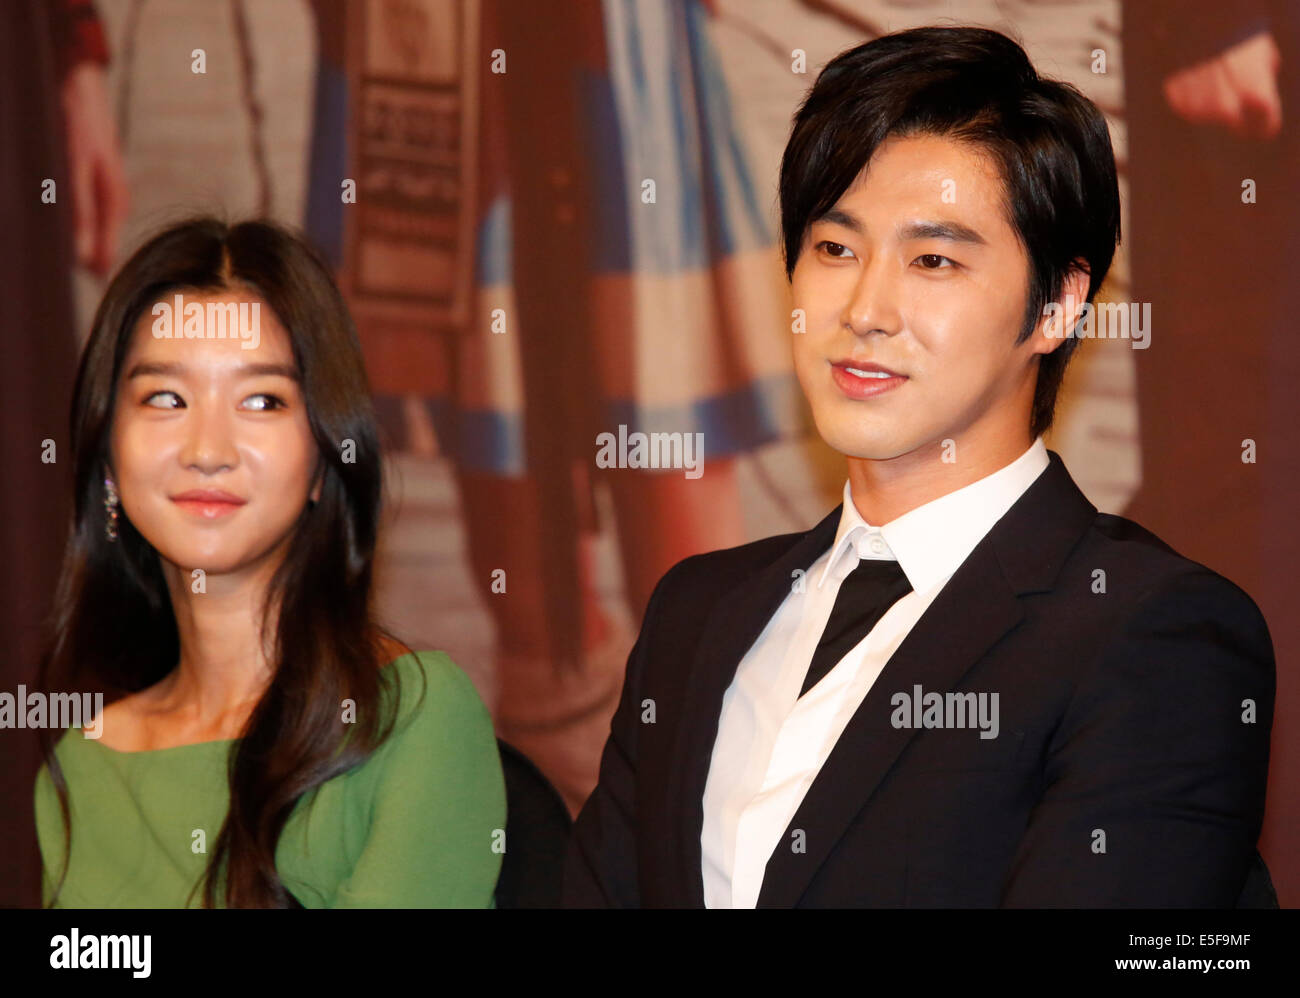 Seo Yea-Ji and Yunho(Dongbangsinki), Jul 29, 2014 : South Korean actor and singer Yun-ho, who is a member of boy band TVXQ and actress Seo Yea-ji (L) attend a presentation of their new drama 'The Night Watchman's Journal' in Seoul, South Korea. © Lee Jae-Won/AFLO/Alamy Live News Stock Photo